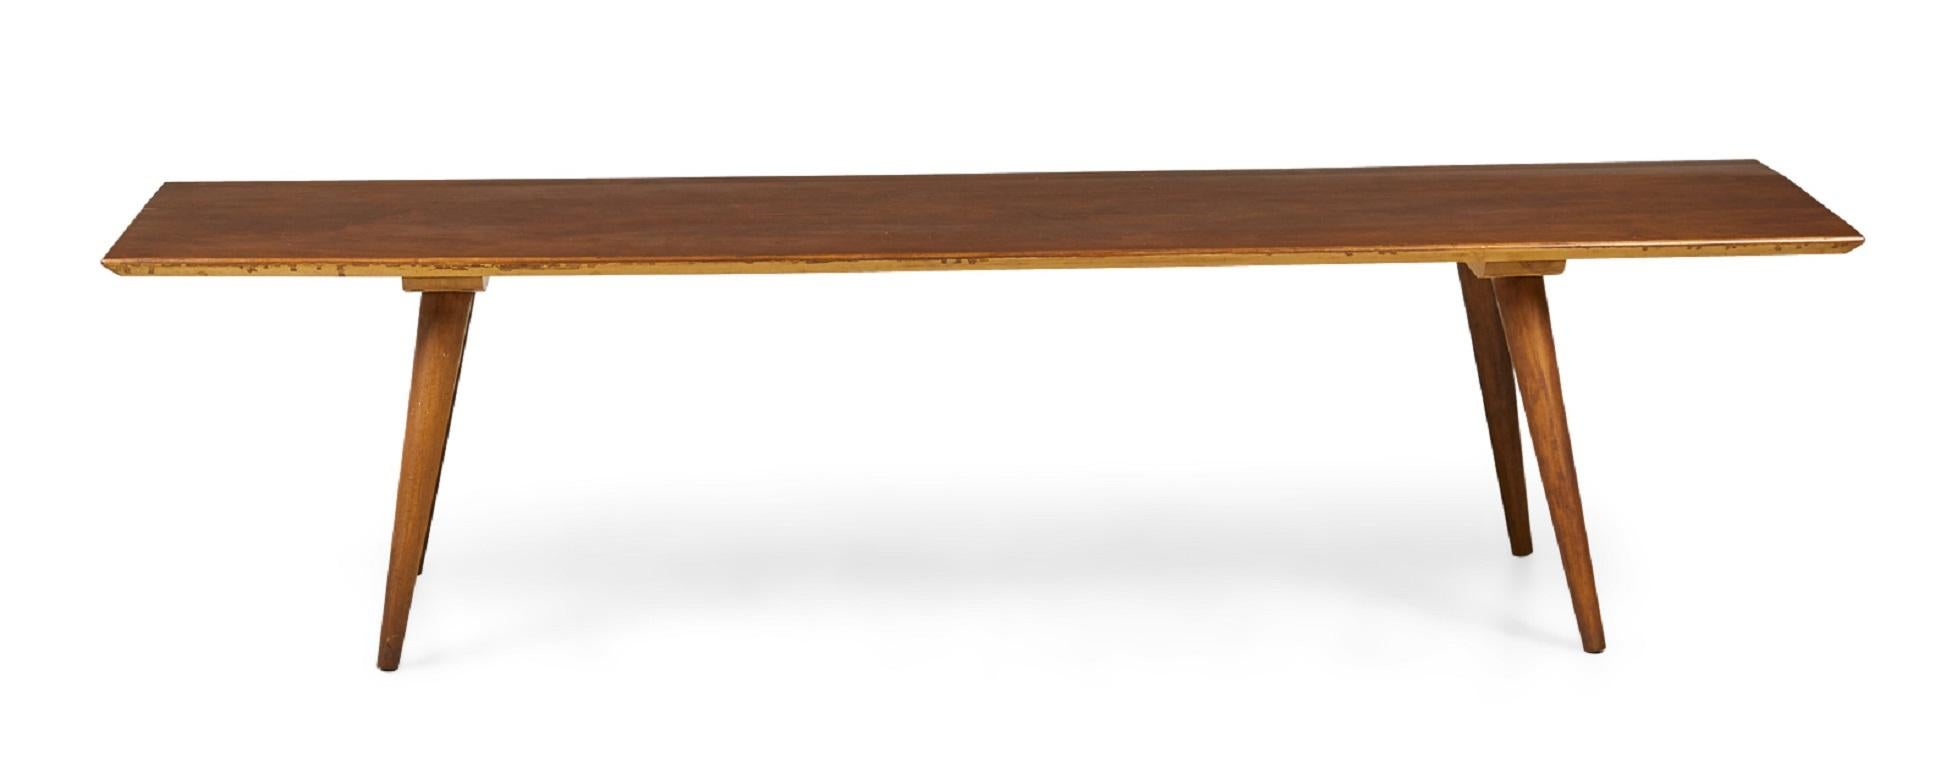 20th Century Paul McCobb for Winchendon Furniture Co 'Planner Group' Maple Coffee Table For Sale